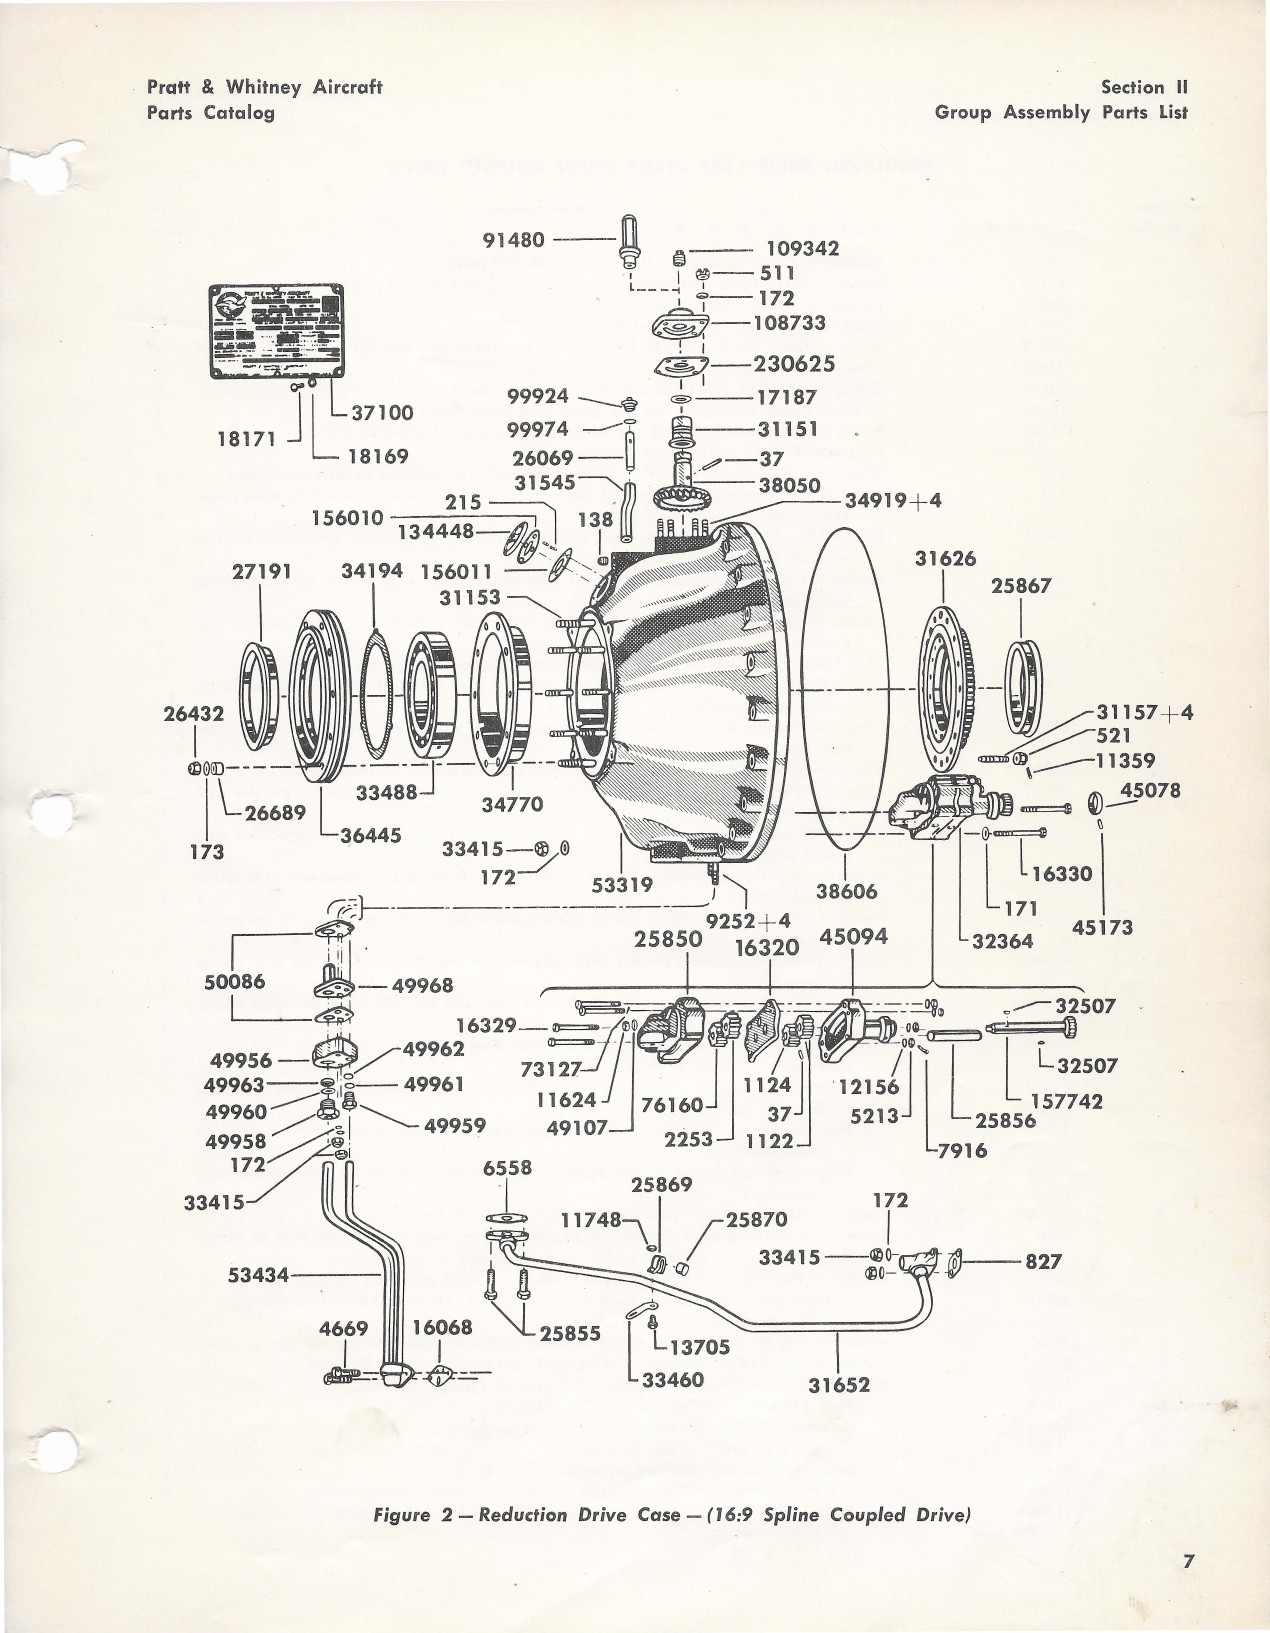 Sample page 9 from AirCorps Library document: Parts Catalog for Twin Wasp R-1830 - S1C3G